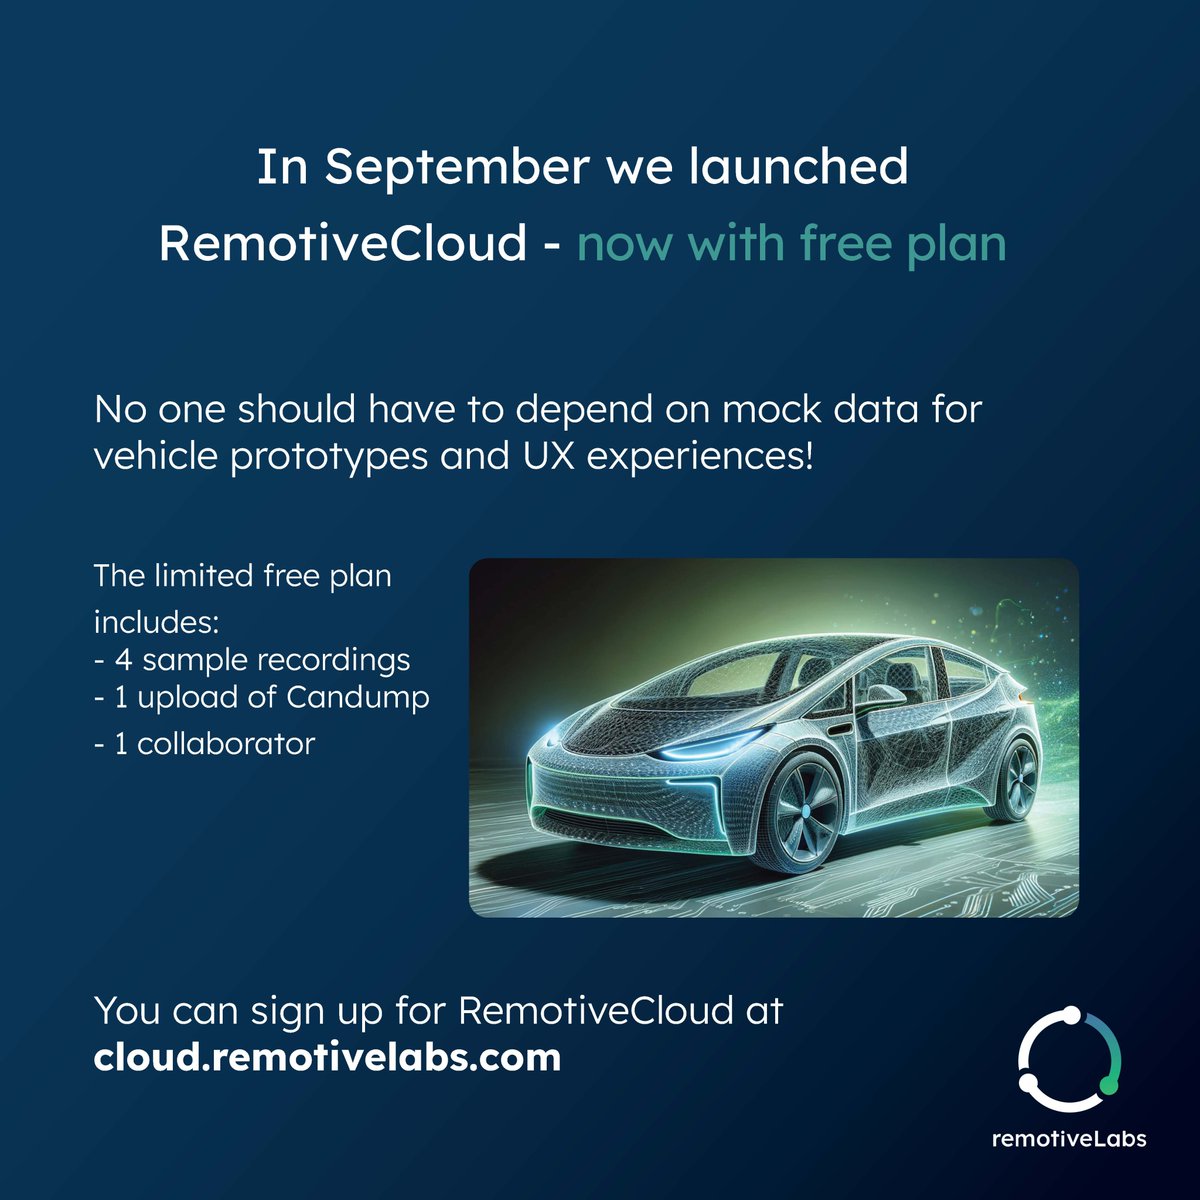 Discover how RemotiveCloud's free plan elevates your prototyping & UX experiences - sign up for free at cloud.remotivelabs.com #getstuffdone #automotivesoftware